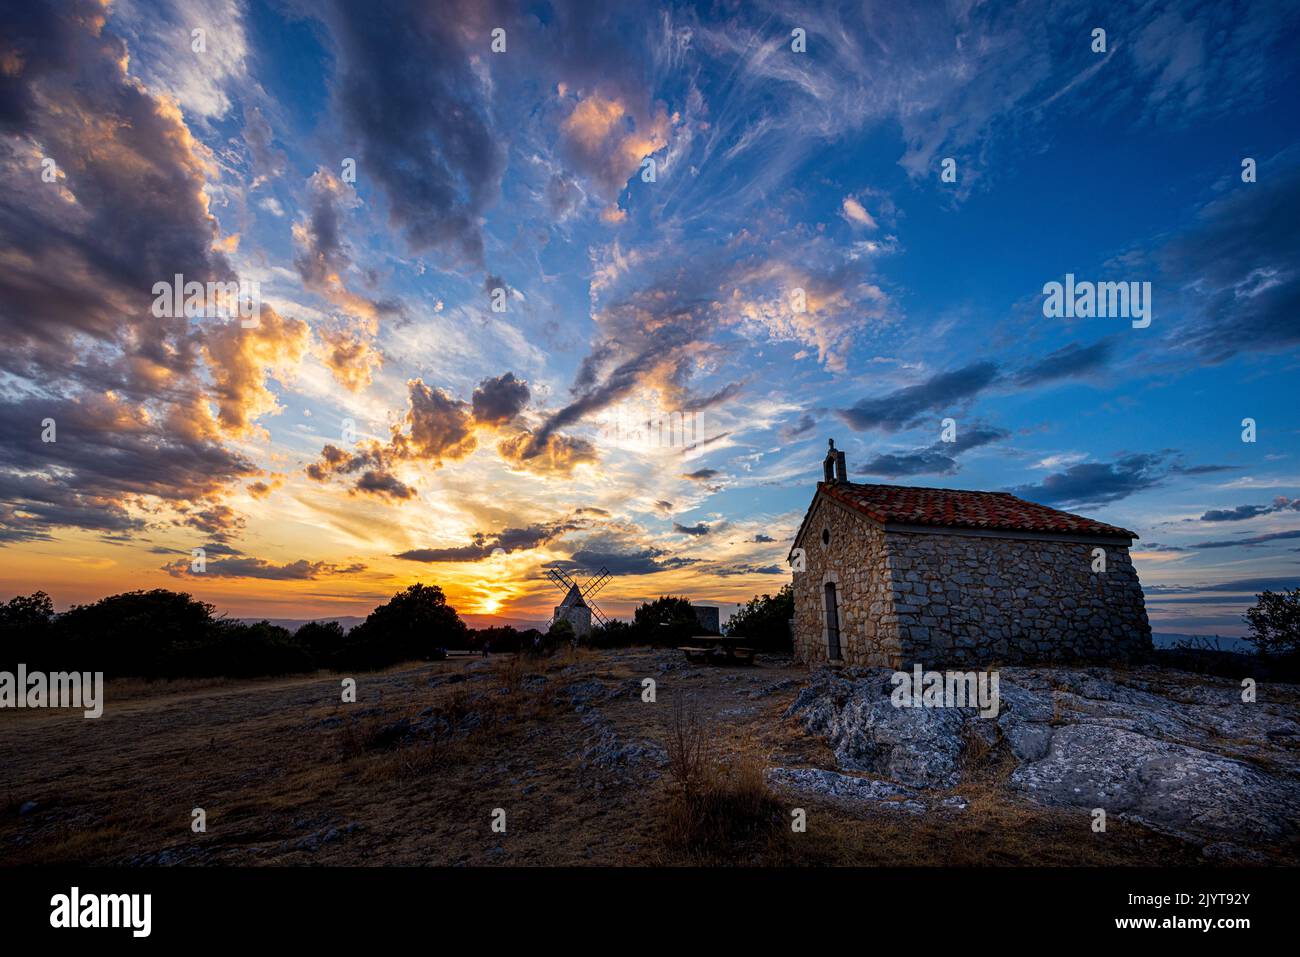 The Mill of Saint Julien de Montagnier and the chapel of the Annonciade at sunset, Var, France Stock Photo